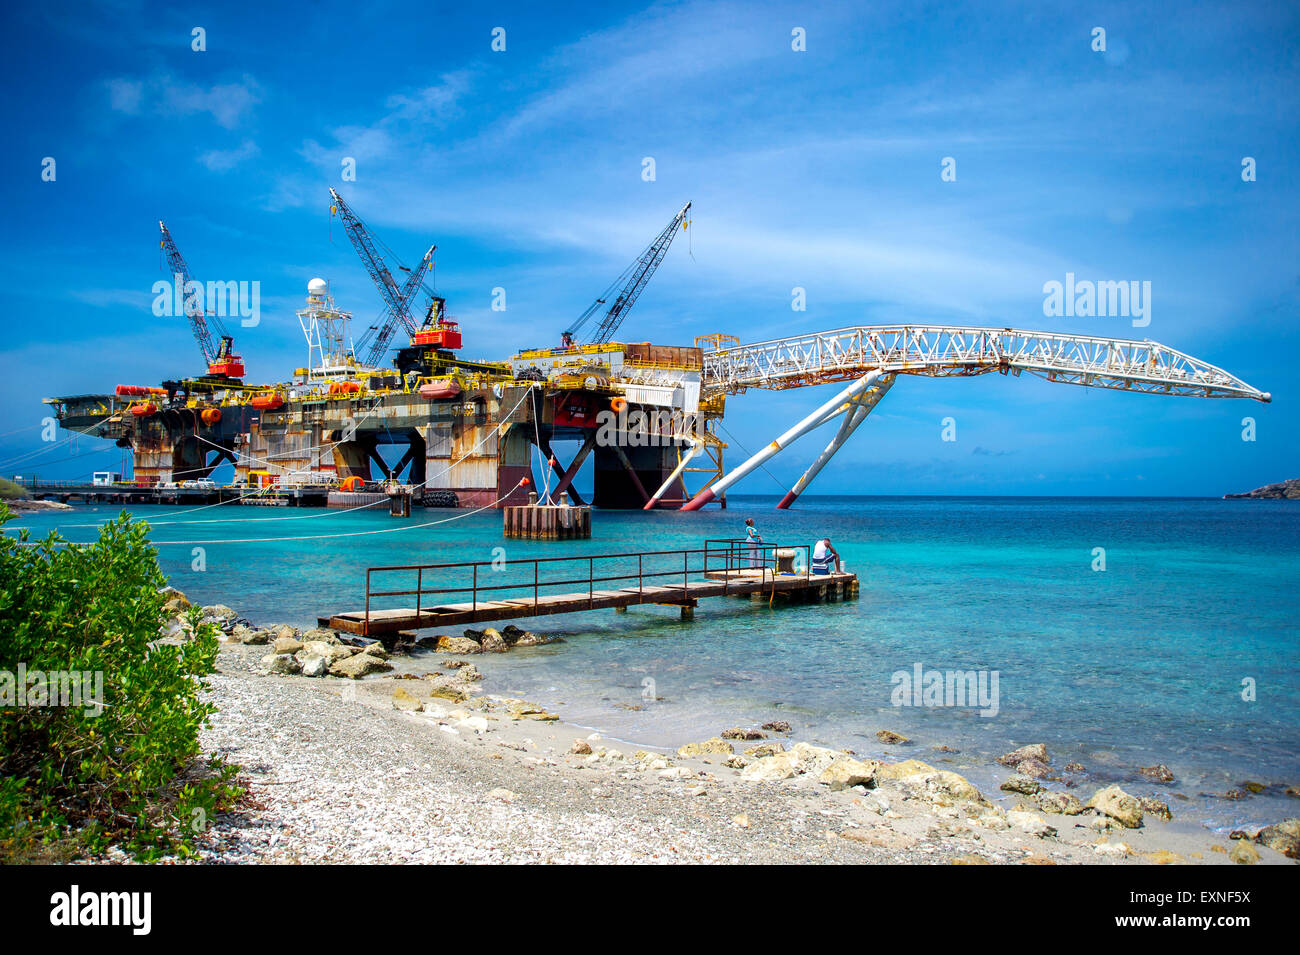 Oil rig under repair in the Caracas Bay Curacao Stock Photo